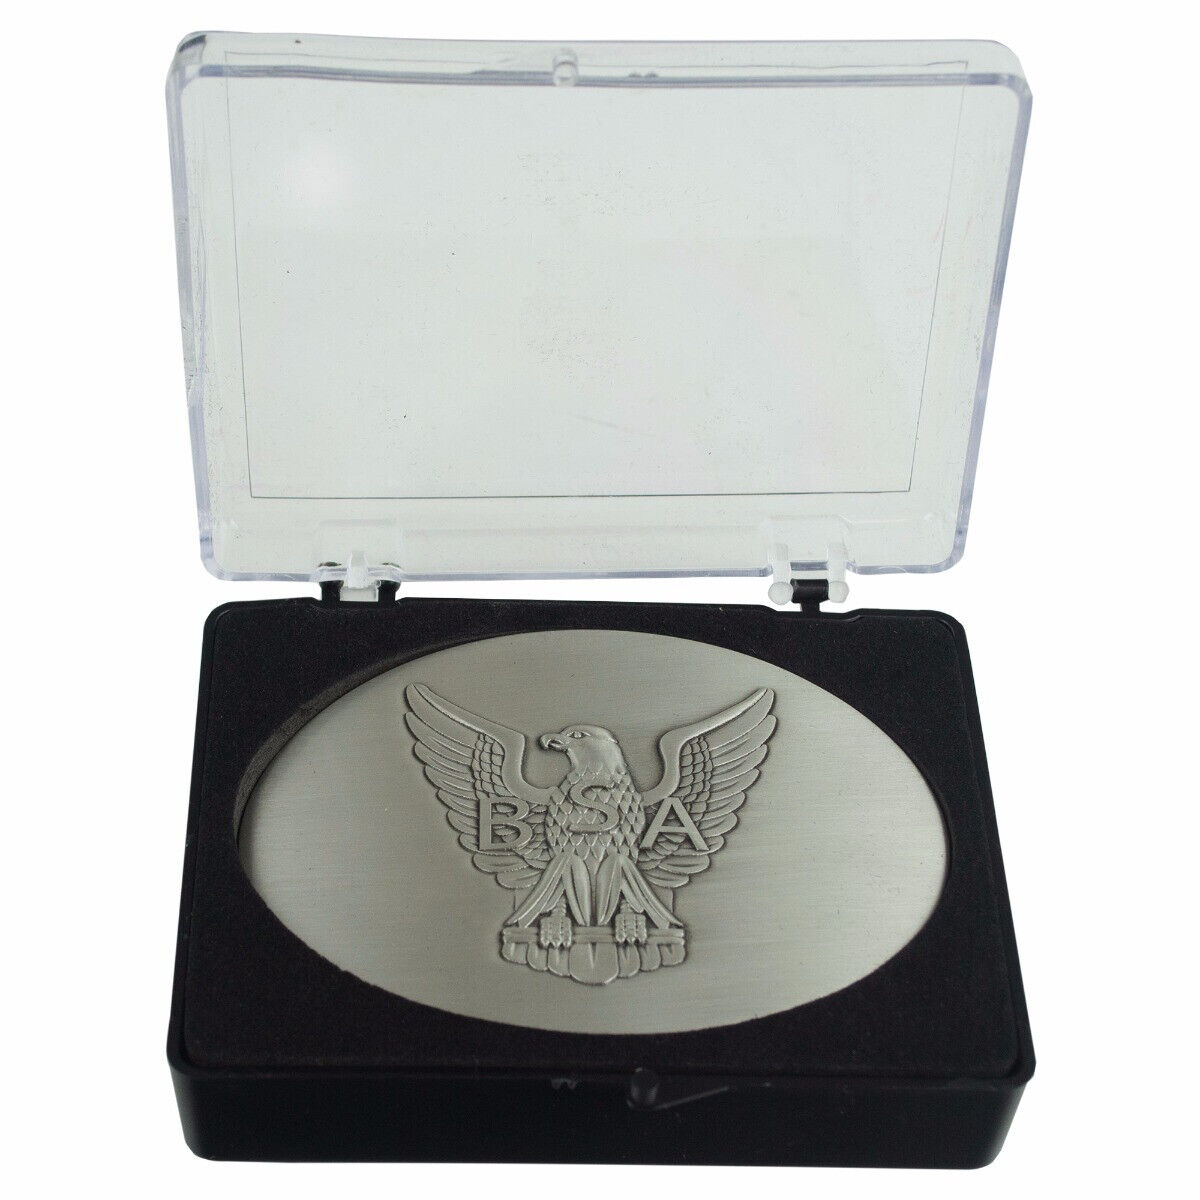 BOY SCOUT OFFICIAL EAGLE SCOUT BELT BUCKLE DISPLAY PRESENTATION CASE GIFT BOX